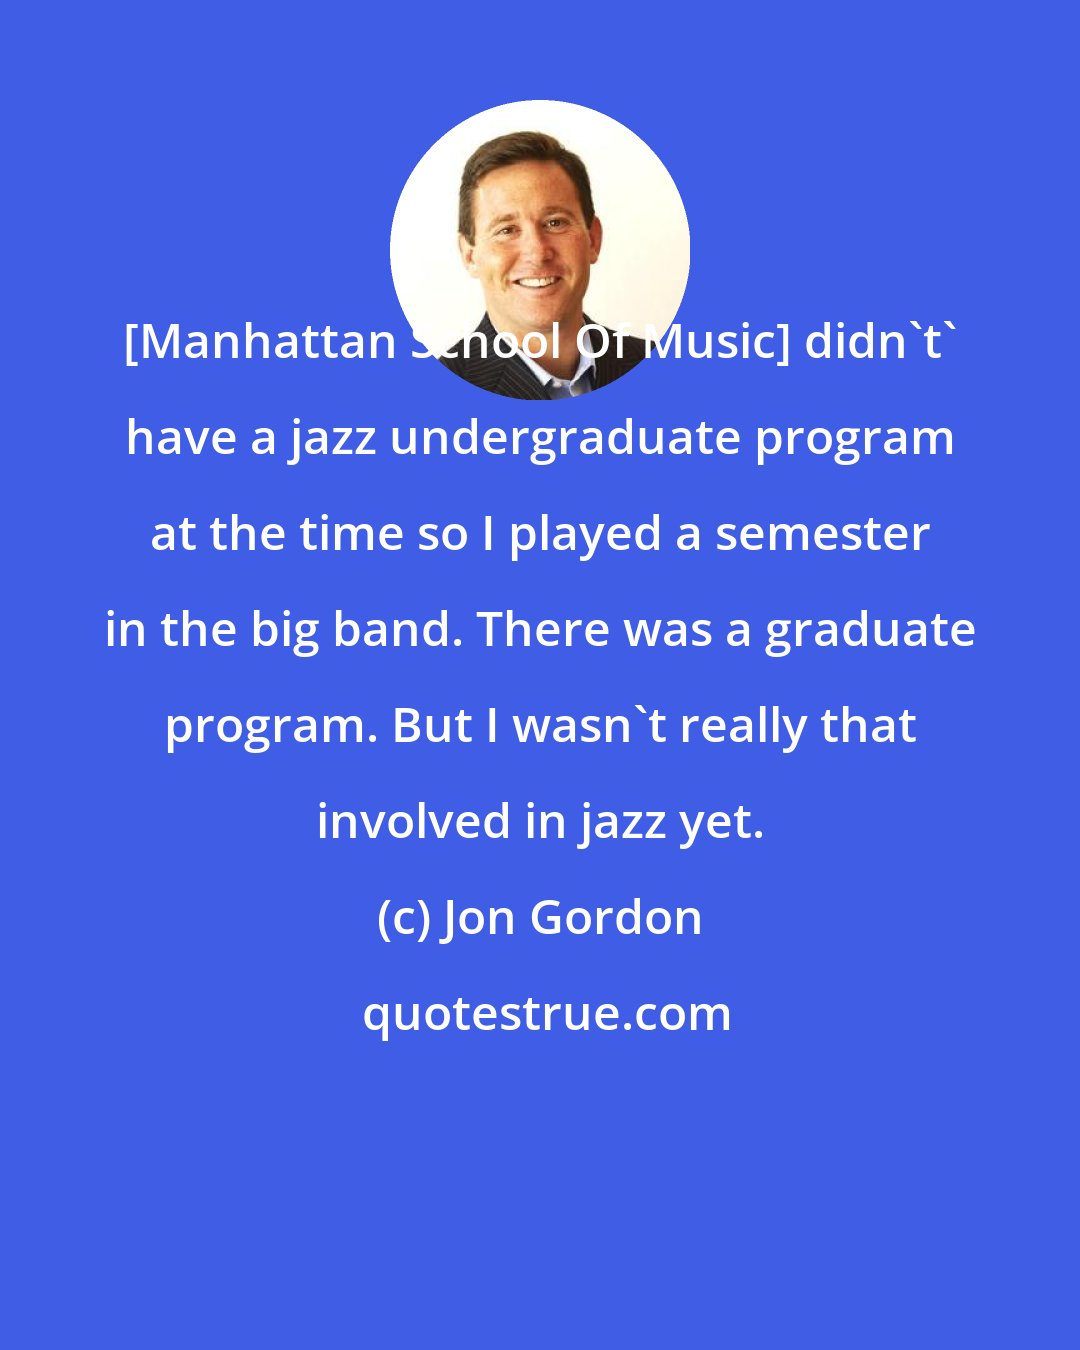 Jon Gordon: [Manhattan School Of Music] didn't' have a jazz undergraduate program at the time so I played a semester in the big band. There was a graduate program. But I wasn't really that involved in jazz yet.